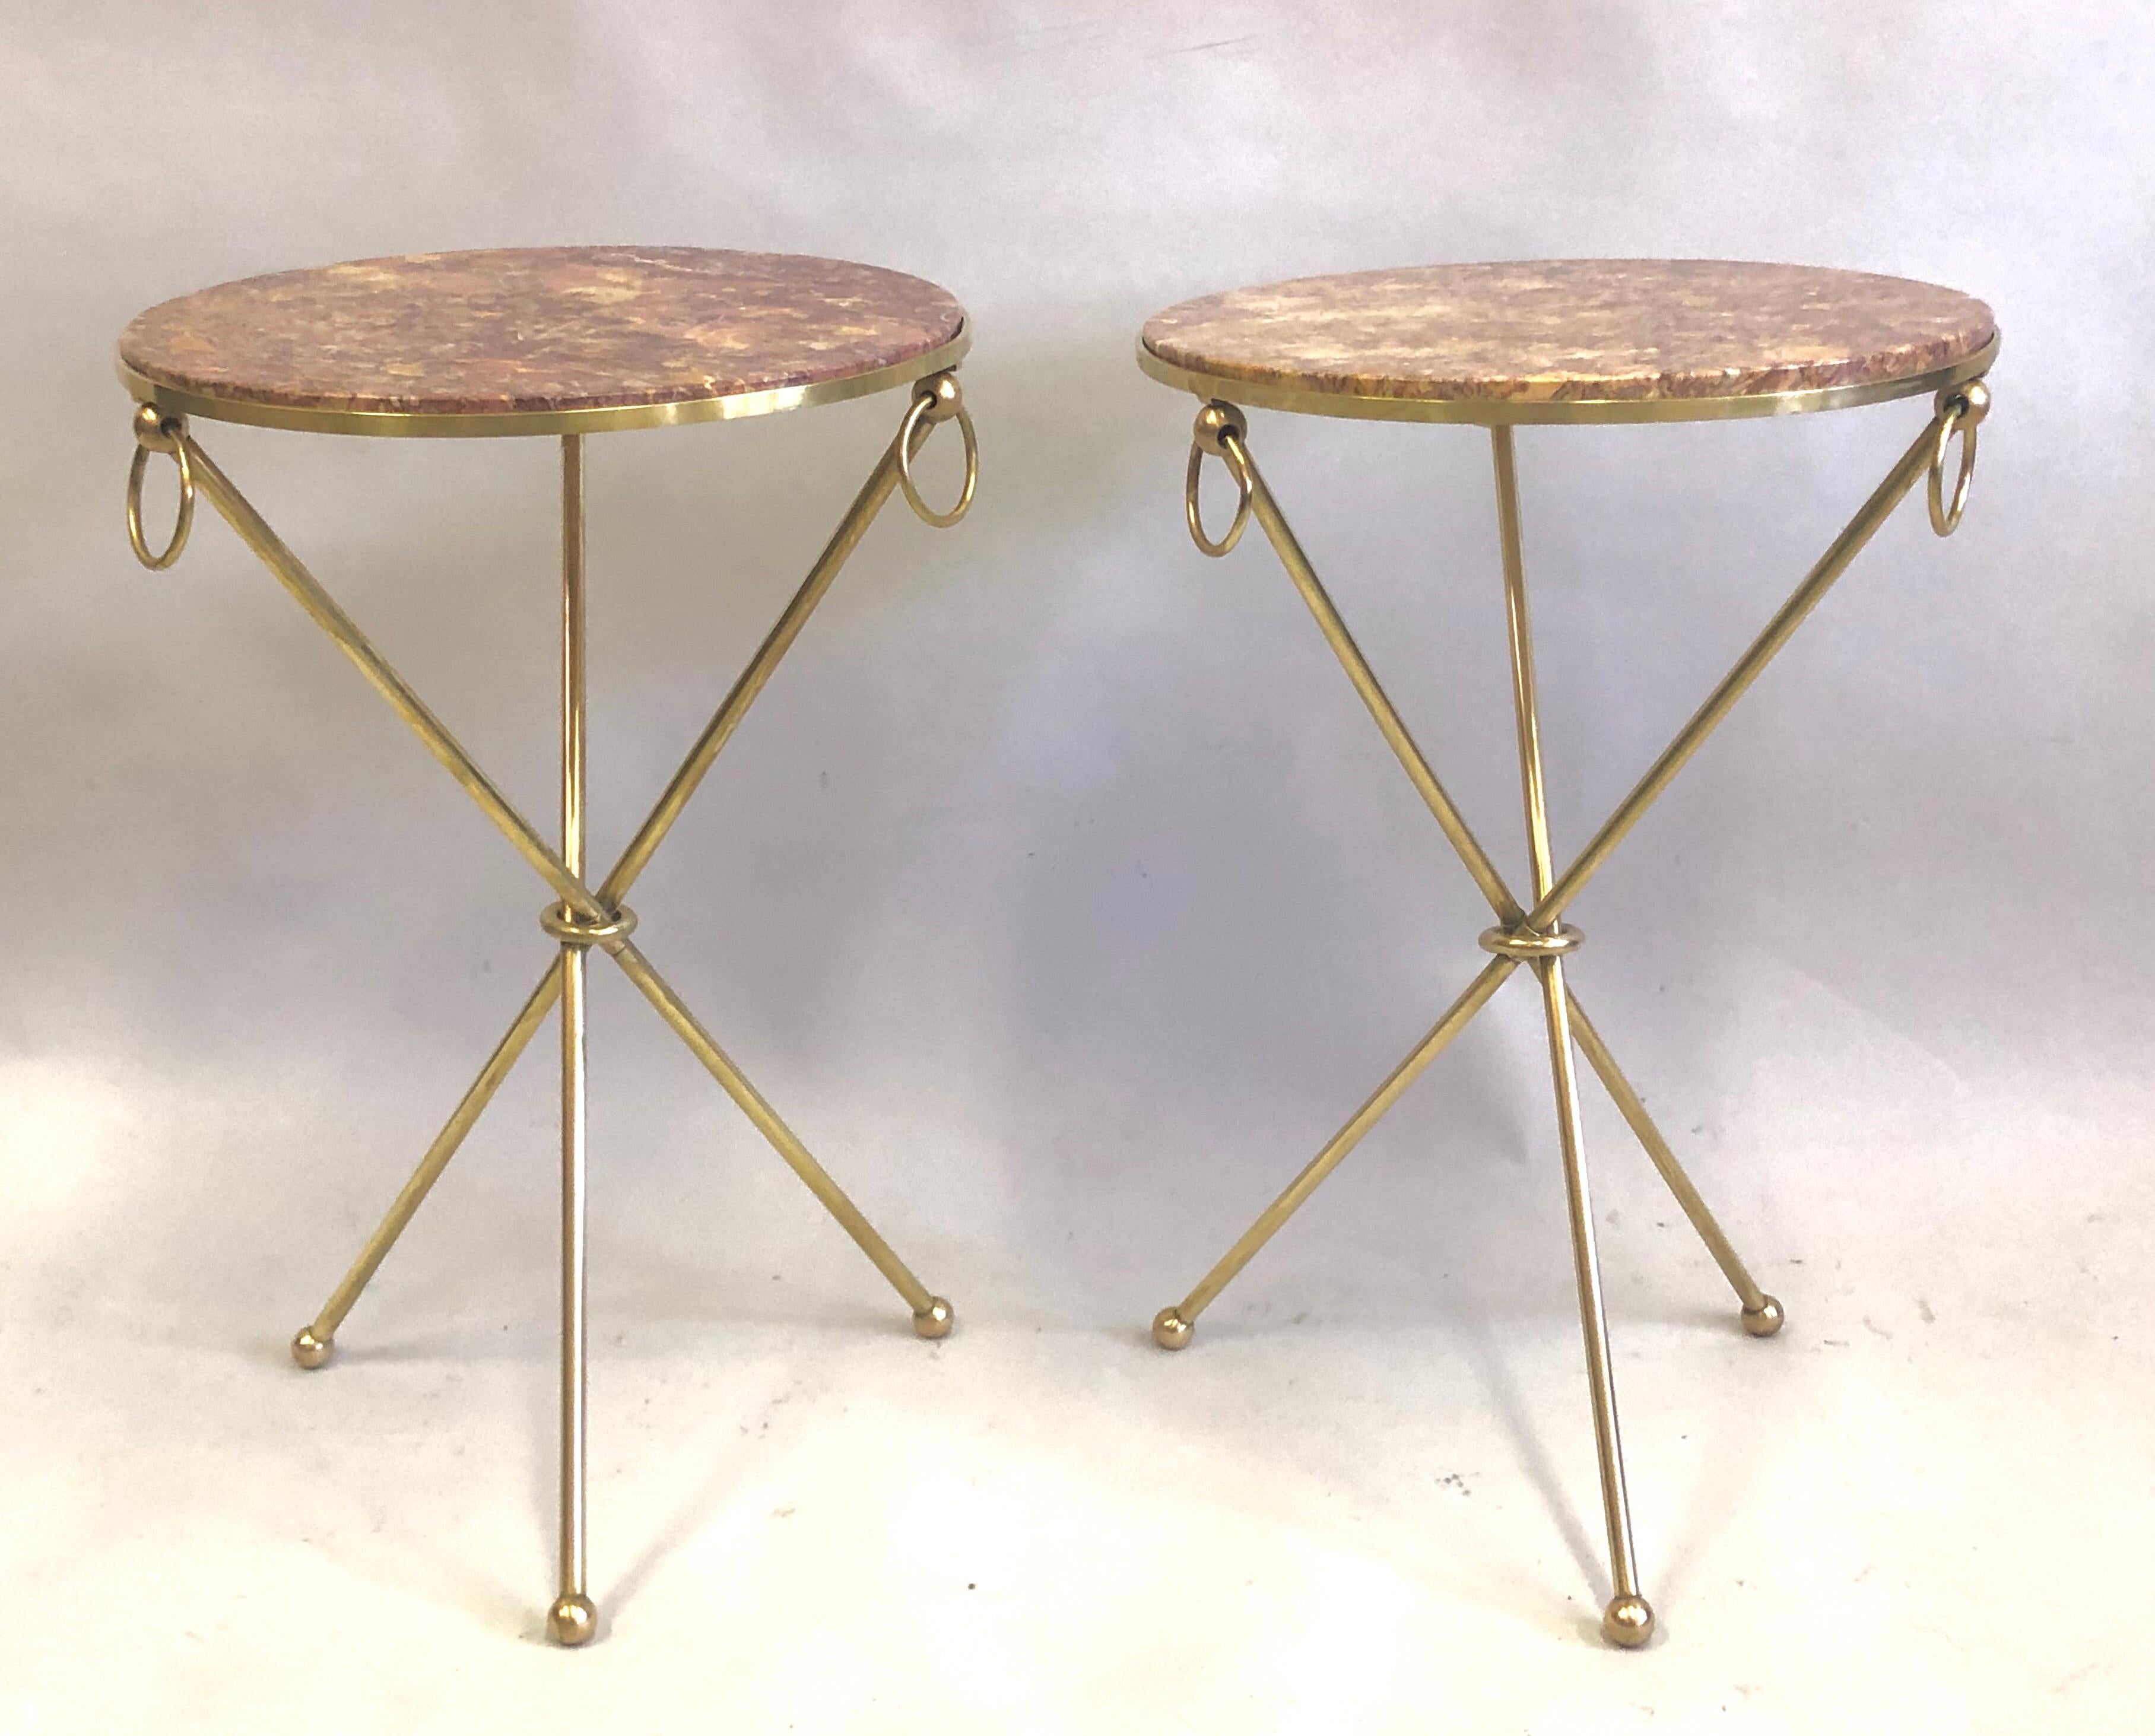 Elegant and timeless pair of French Mid-Century Modern neoclassical brass and marble side or end tables in the style of Jean-Michel Frank. 

The gueridons or tables are constructed in solid brass resting on tripod legs ending in ball feet. They